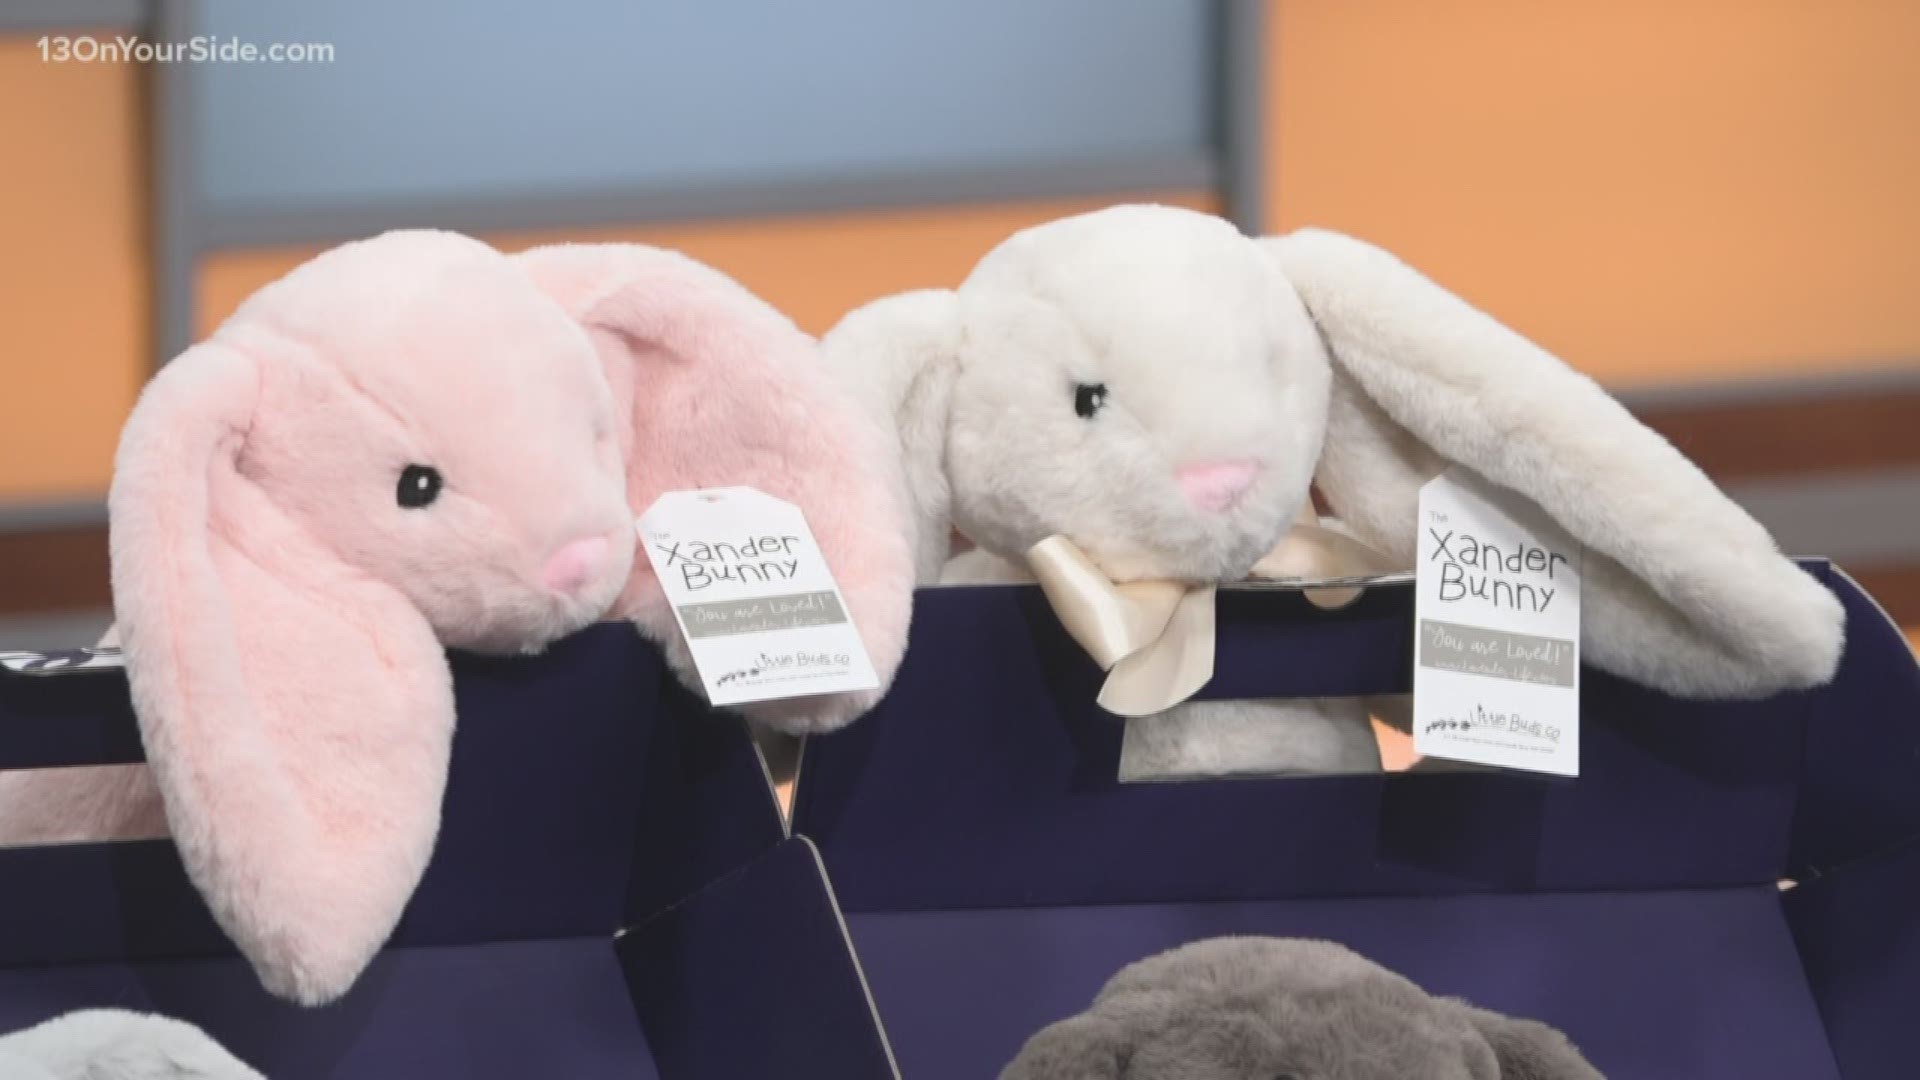 Lavender-filled stuffed bunnies can bring some joy to children in foster care.